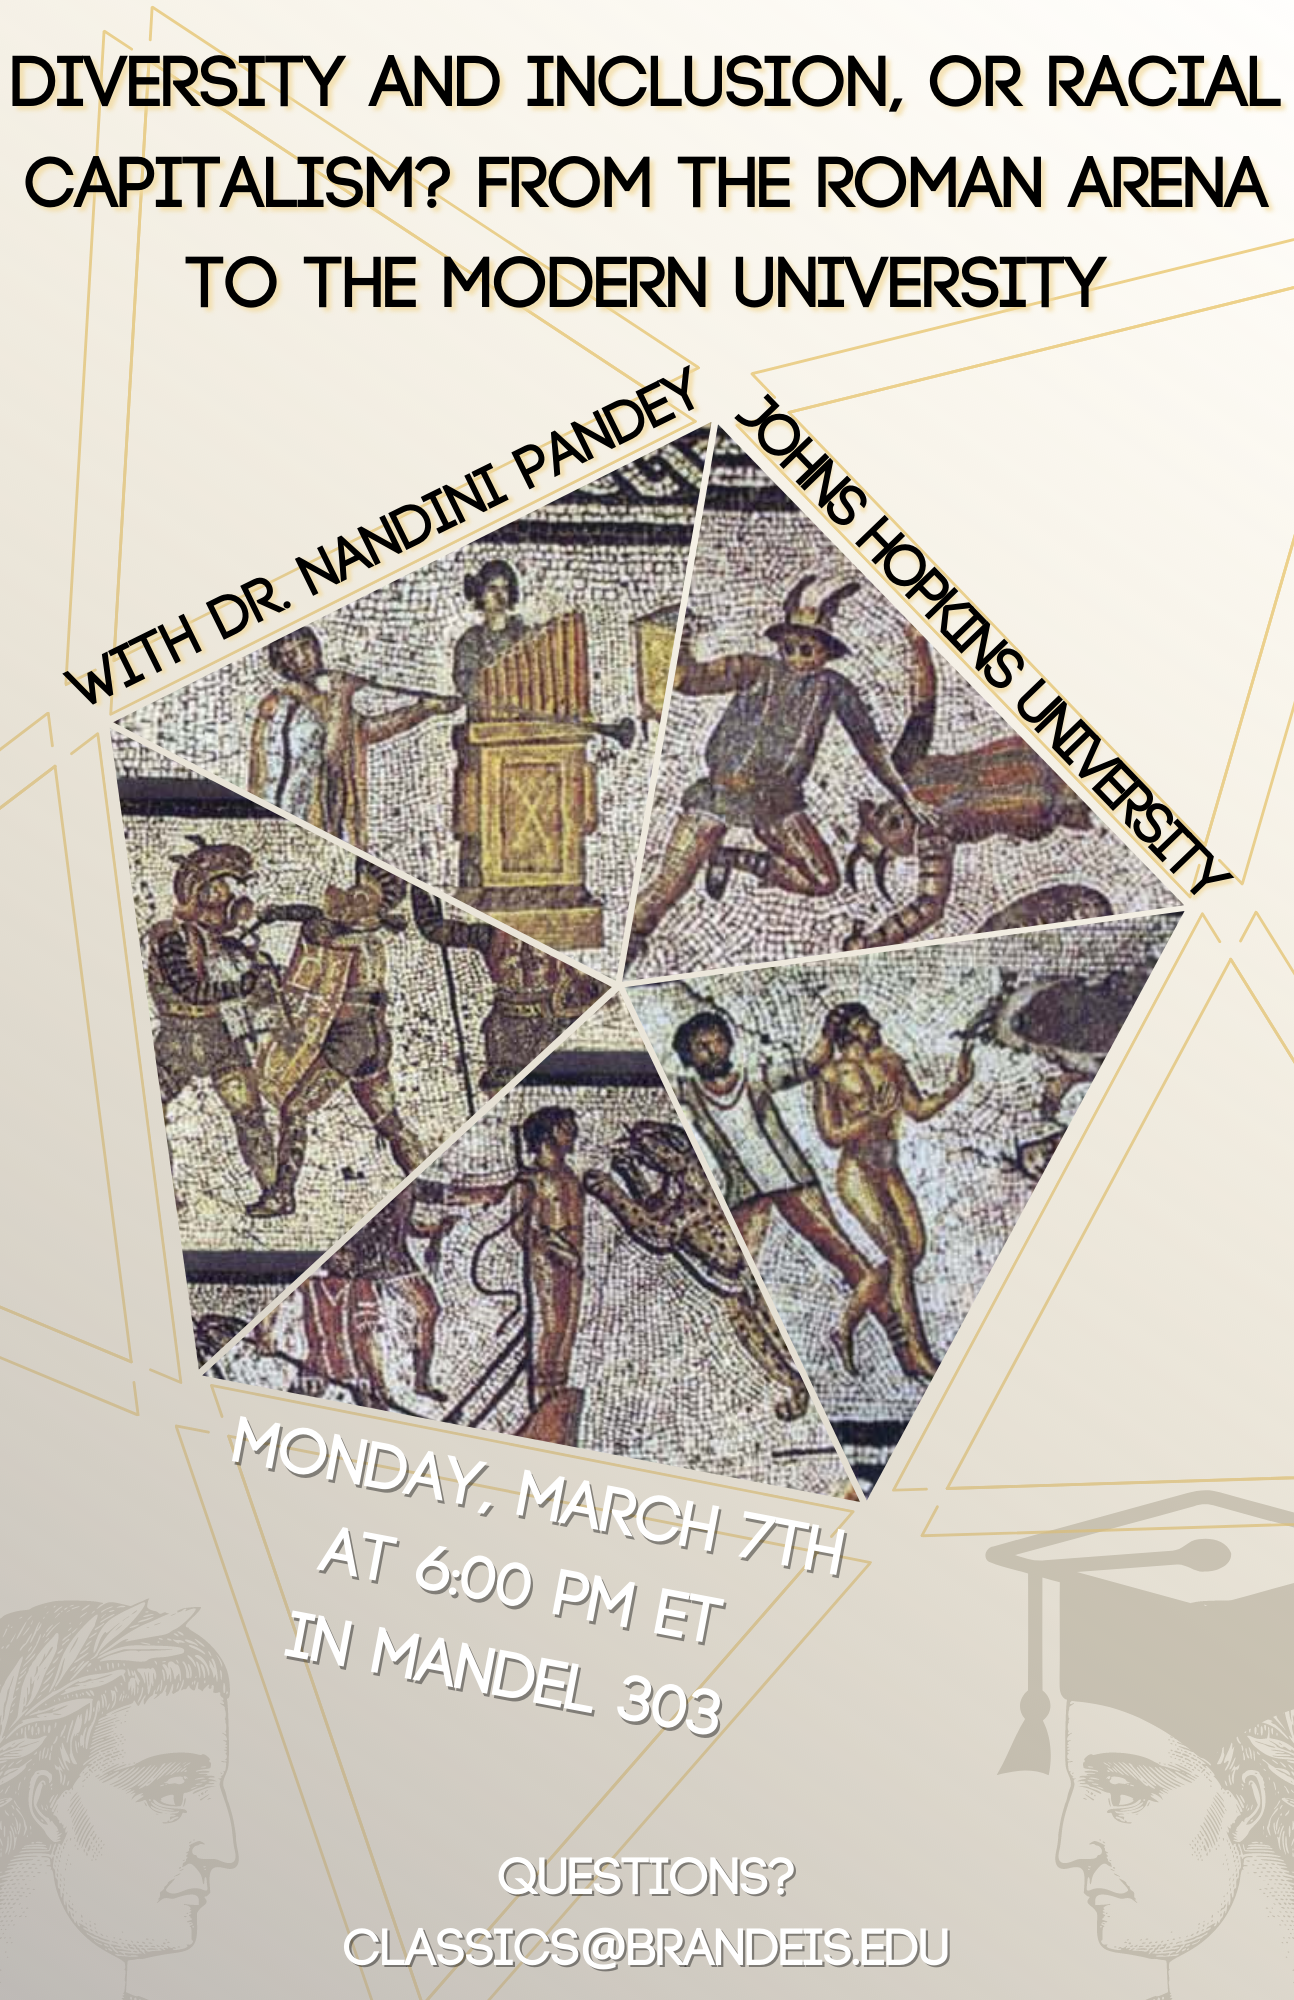 Flyer featuring the talk's title and Roman mosaics